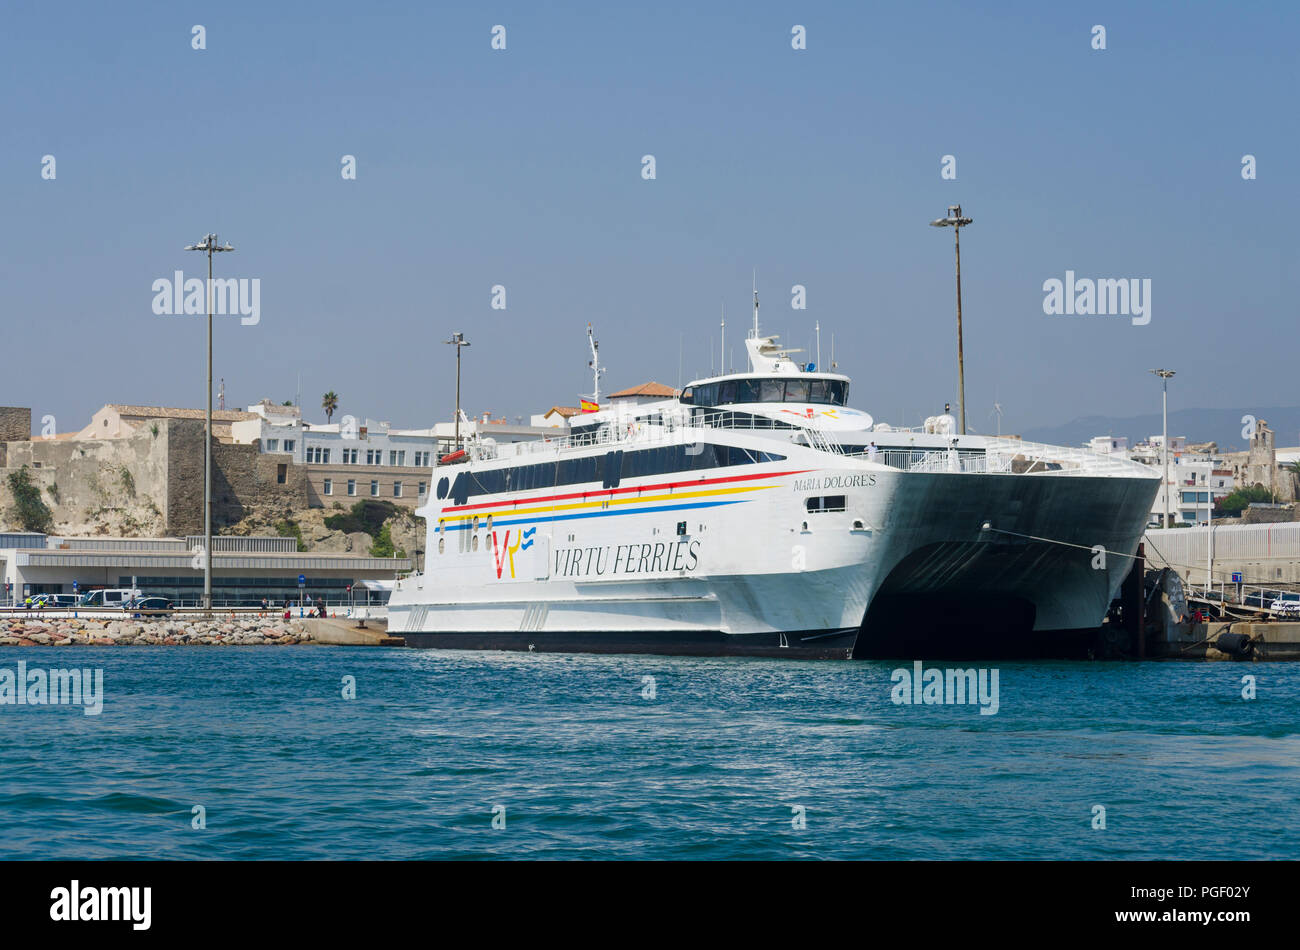 Ferry Port at Tarifa, Virtu ferries, passenger services between Spain and Morocco, North Africa, Costa de la Luz , andalucia, Spain. Stock Photo